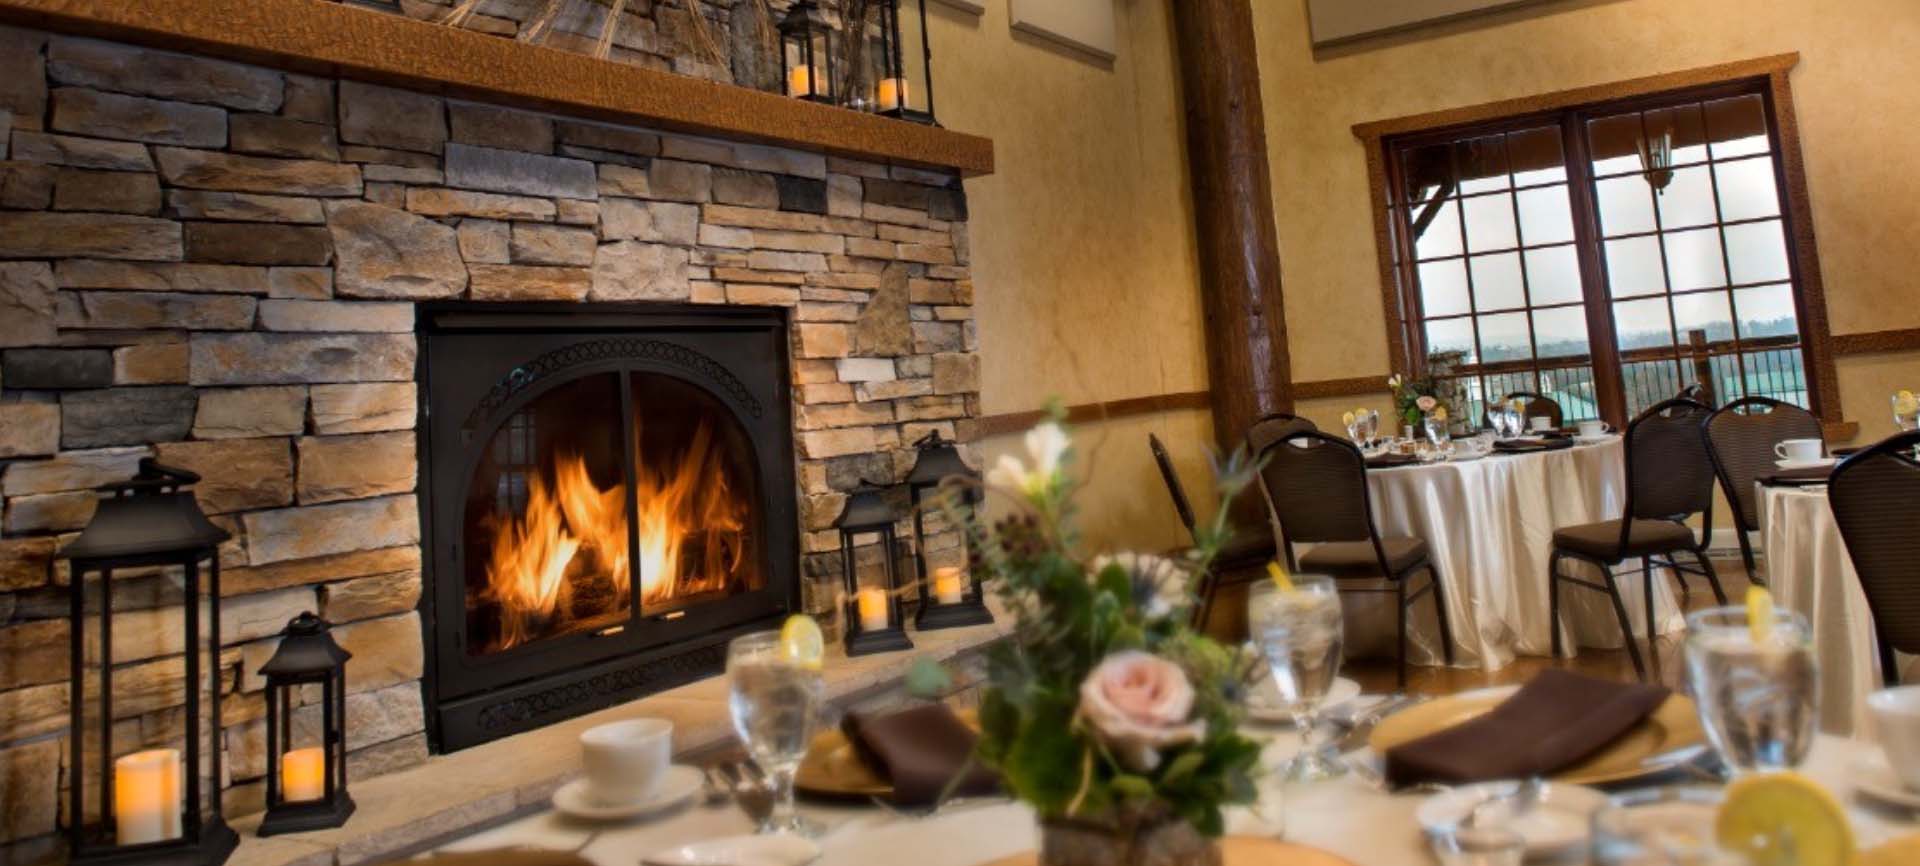 banquest table with fireplace